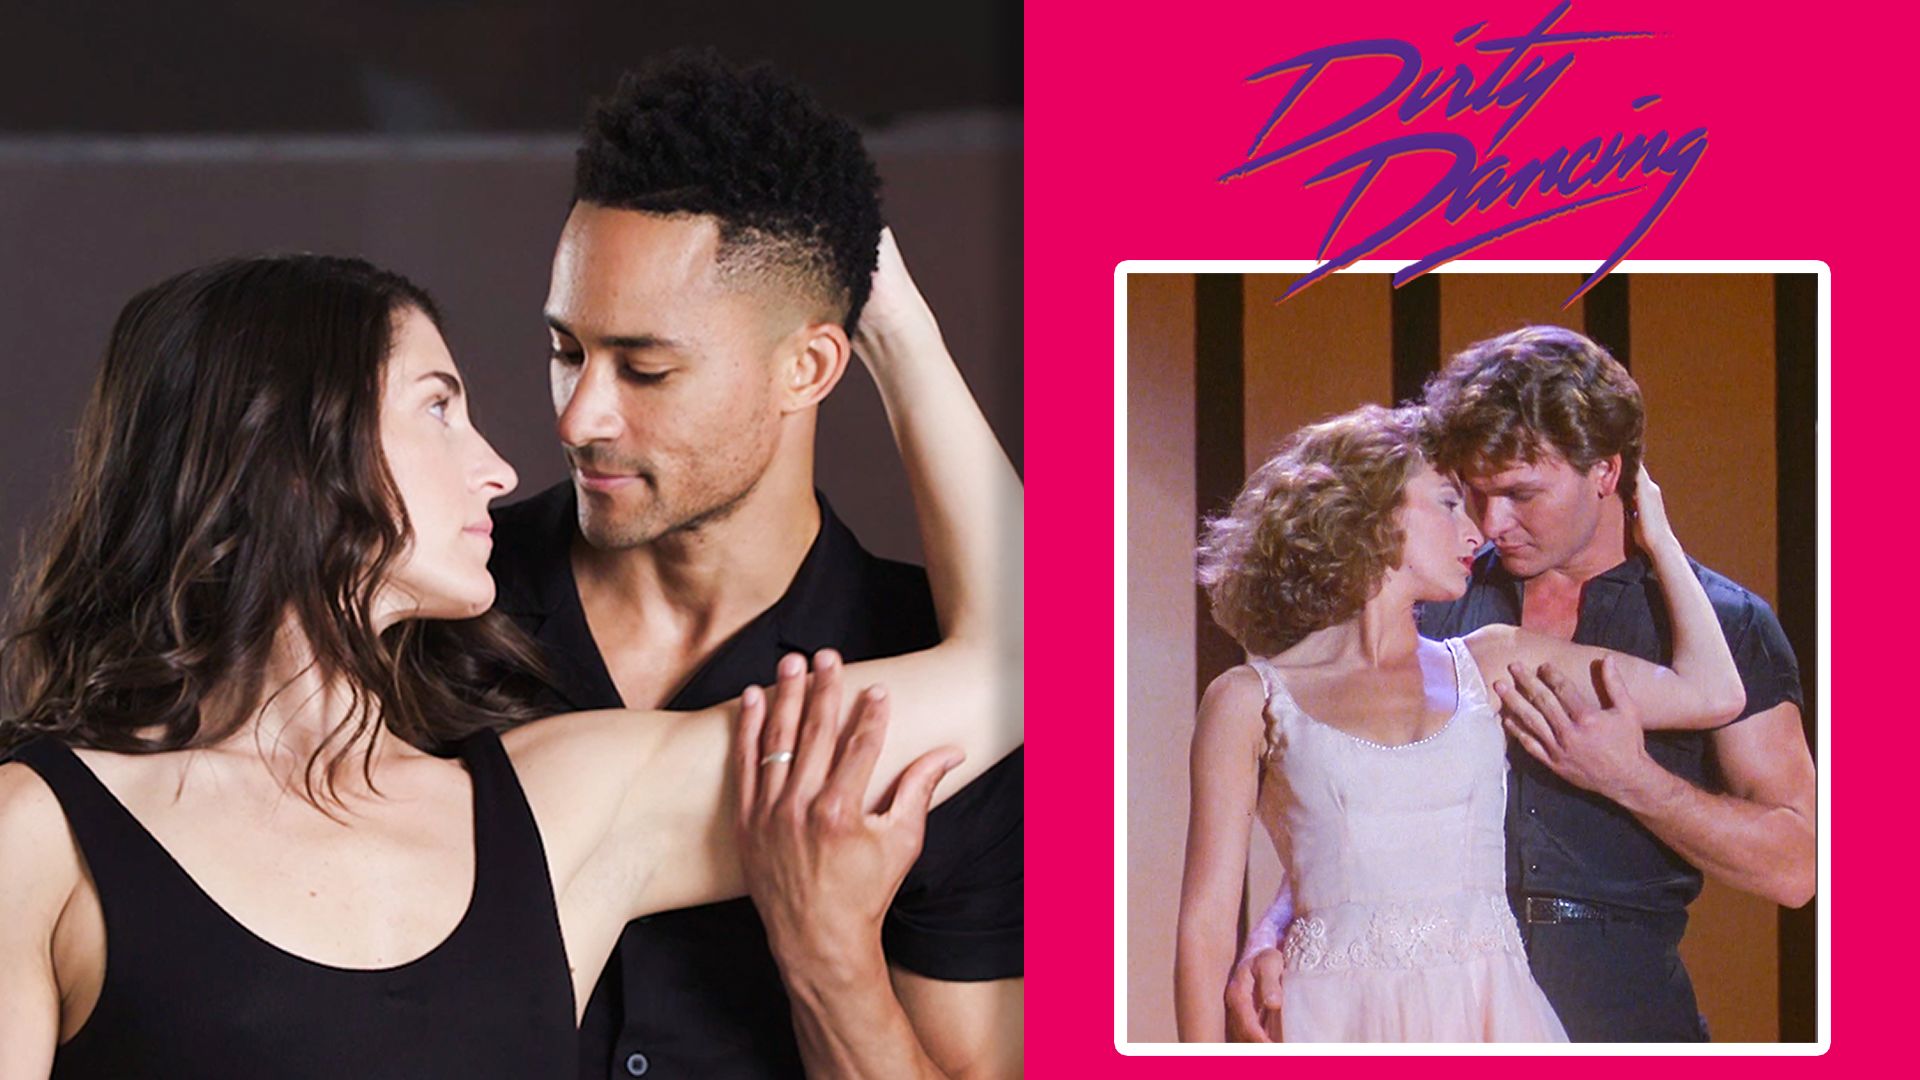 Foreign Dance Sex Hd - Watch Choreographers Break Down the Final Dance Scene from Dirty Dancing |  Movies in Motion | Vanity Fair